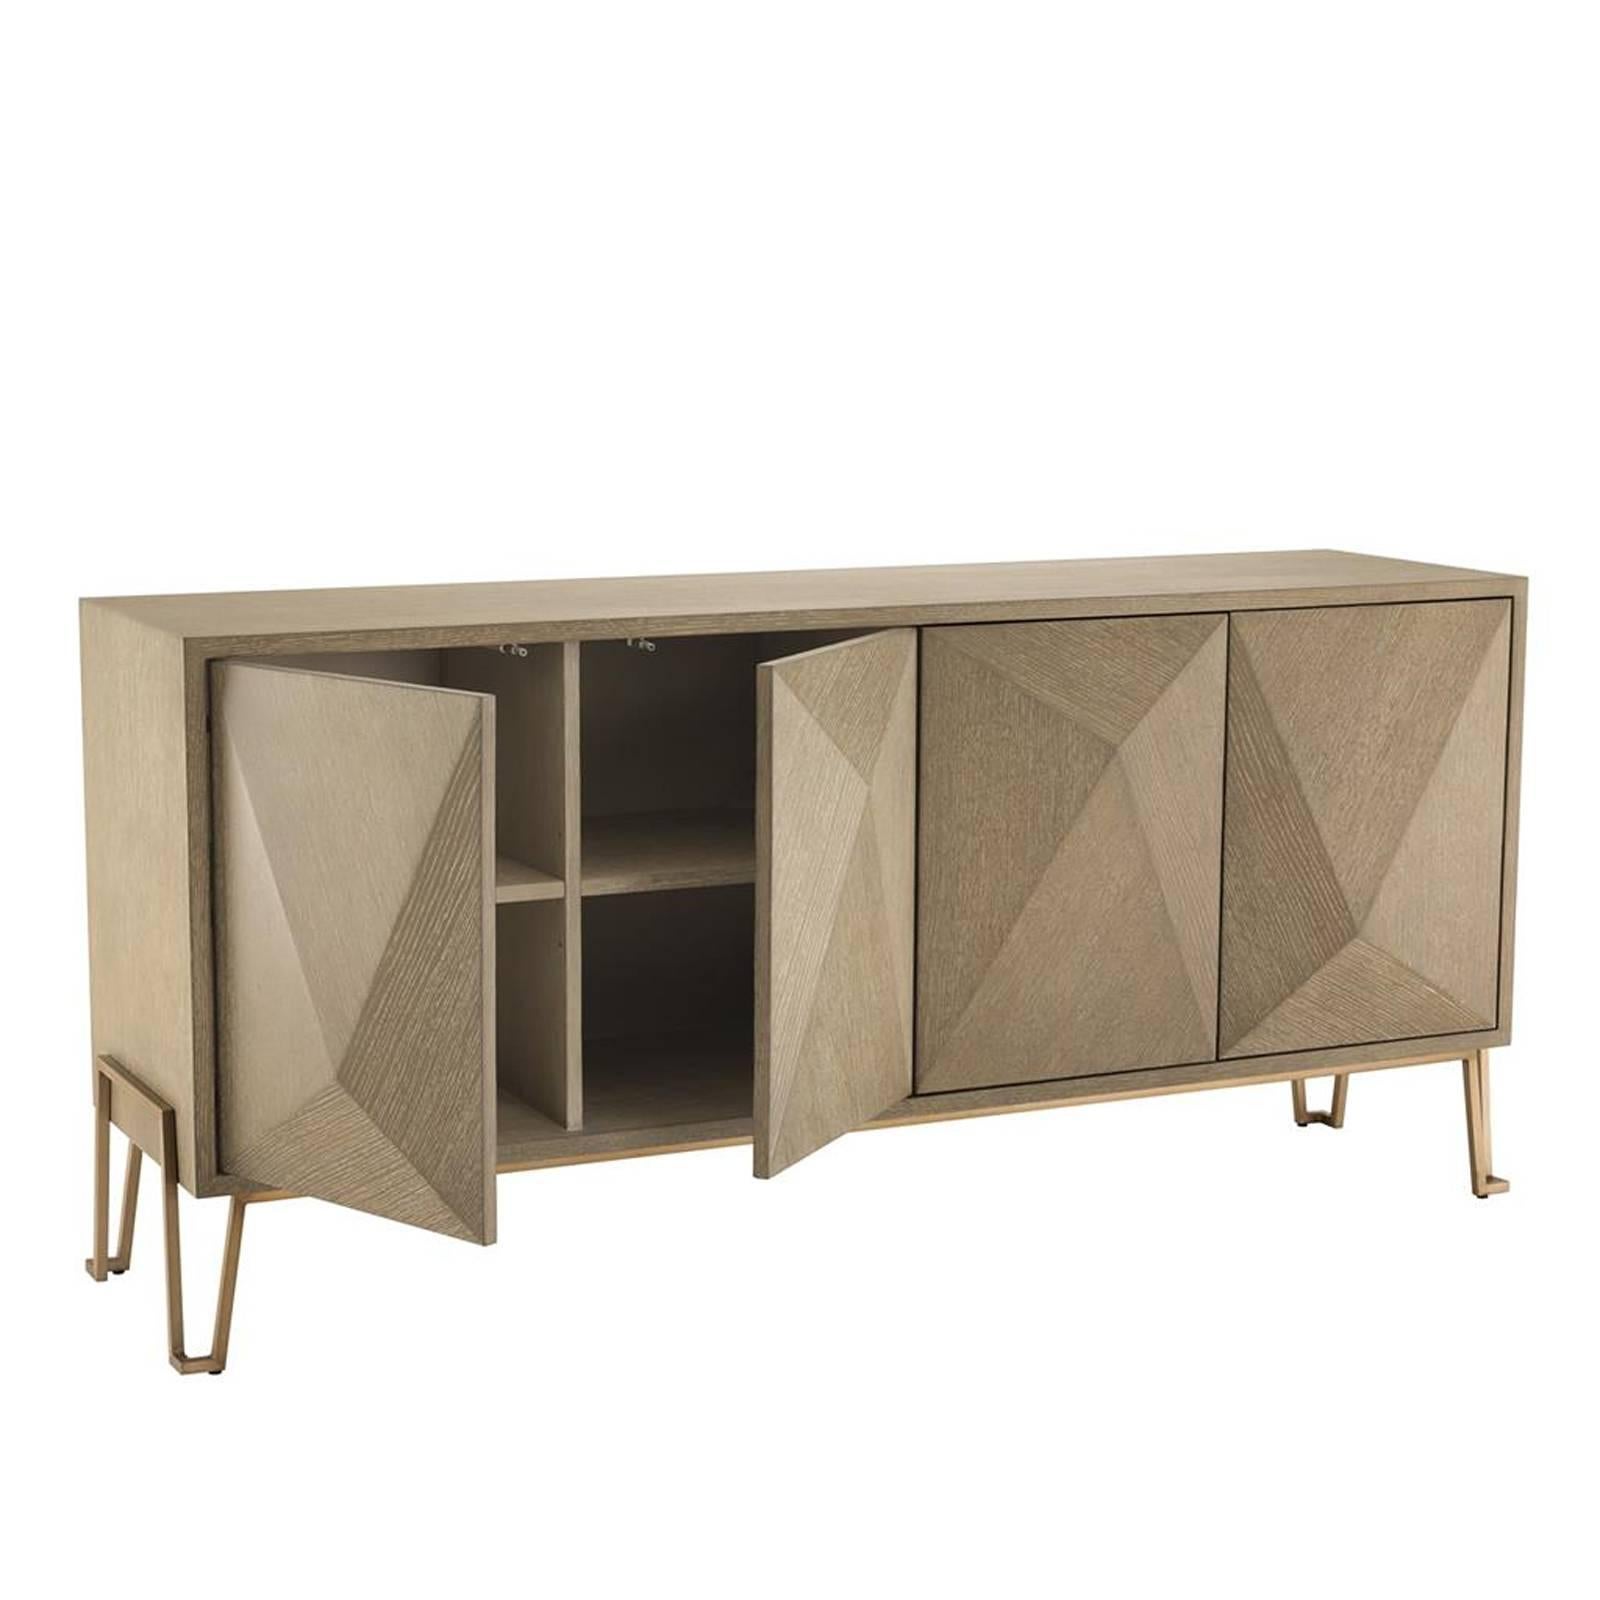 Sparkling and sophisticated sideboard with graphic brass feet and four doors oak wooden diamond shaped opened on shelves.